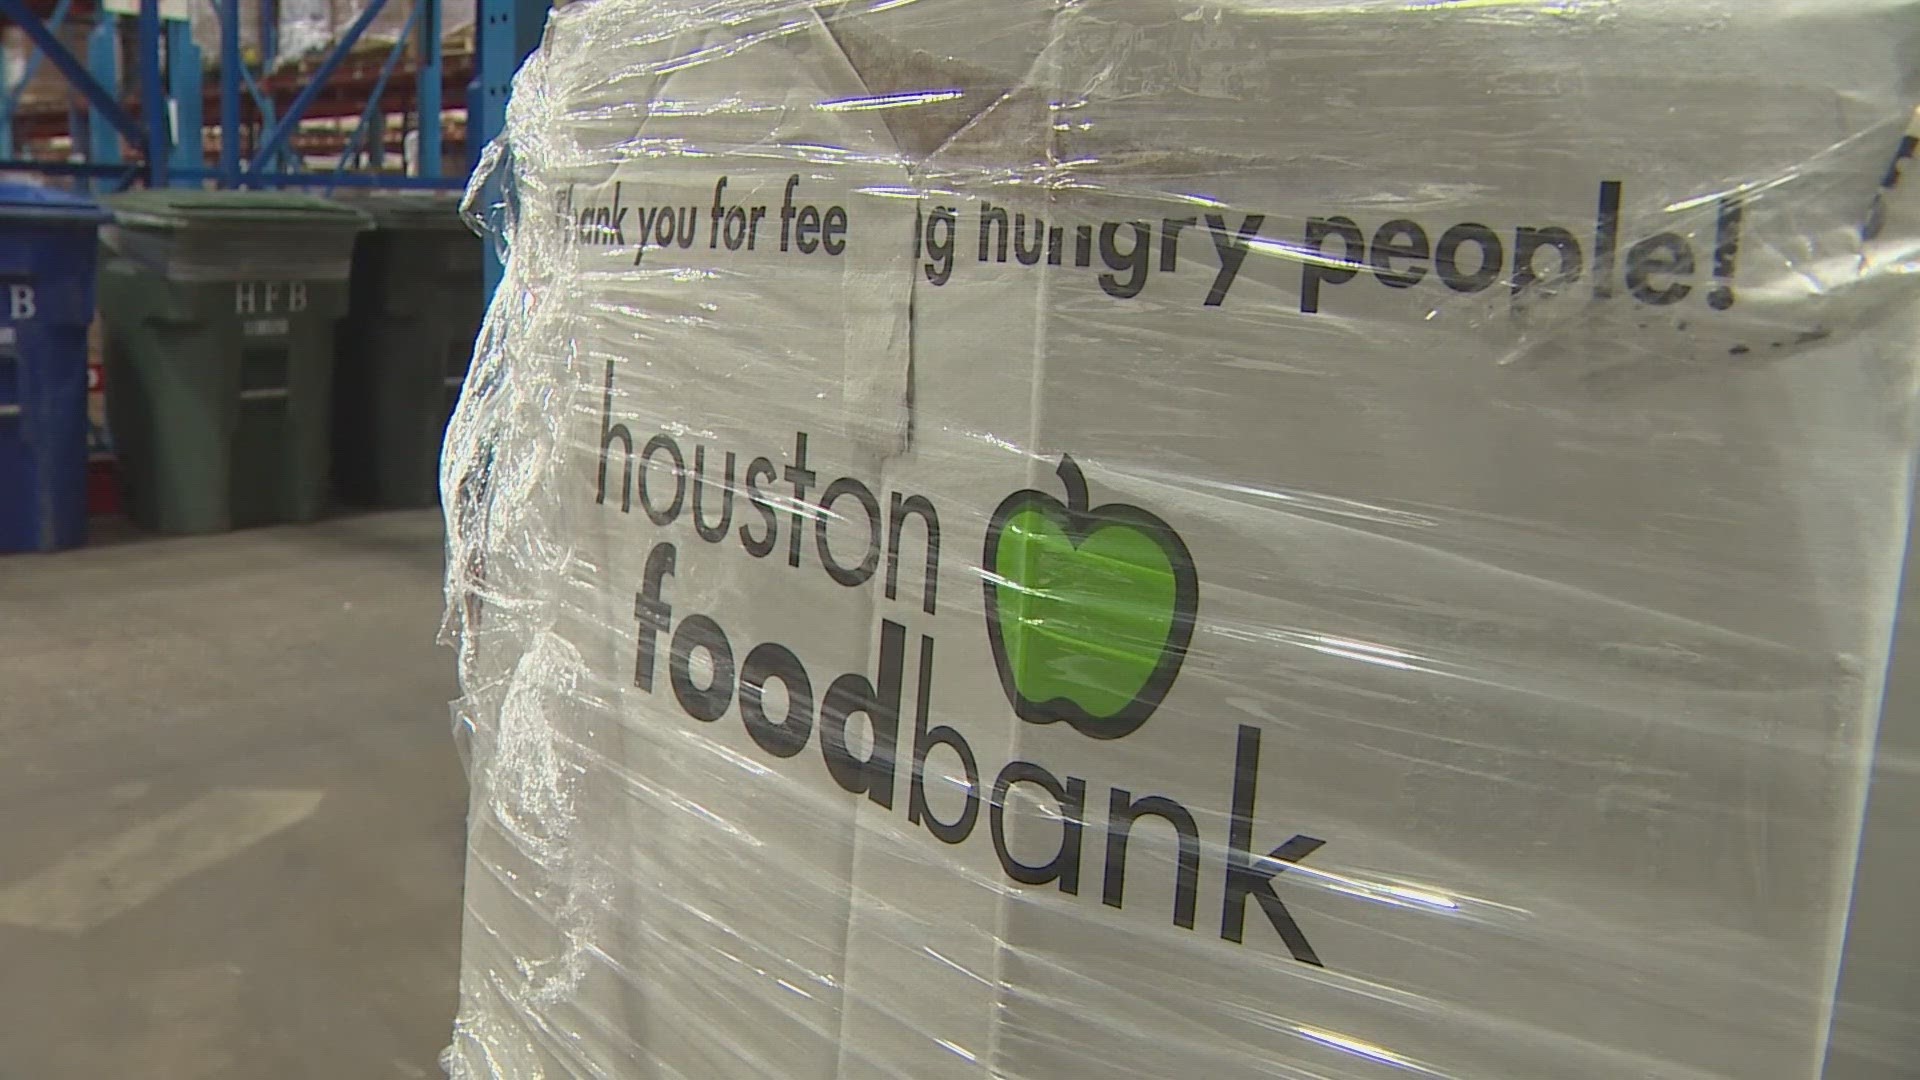 The Houston Food Bank is expecting more demand if the shutdown happens